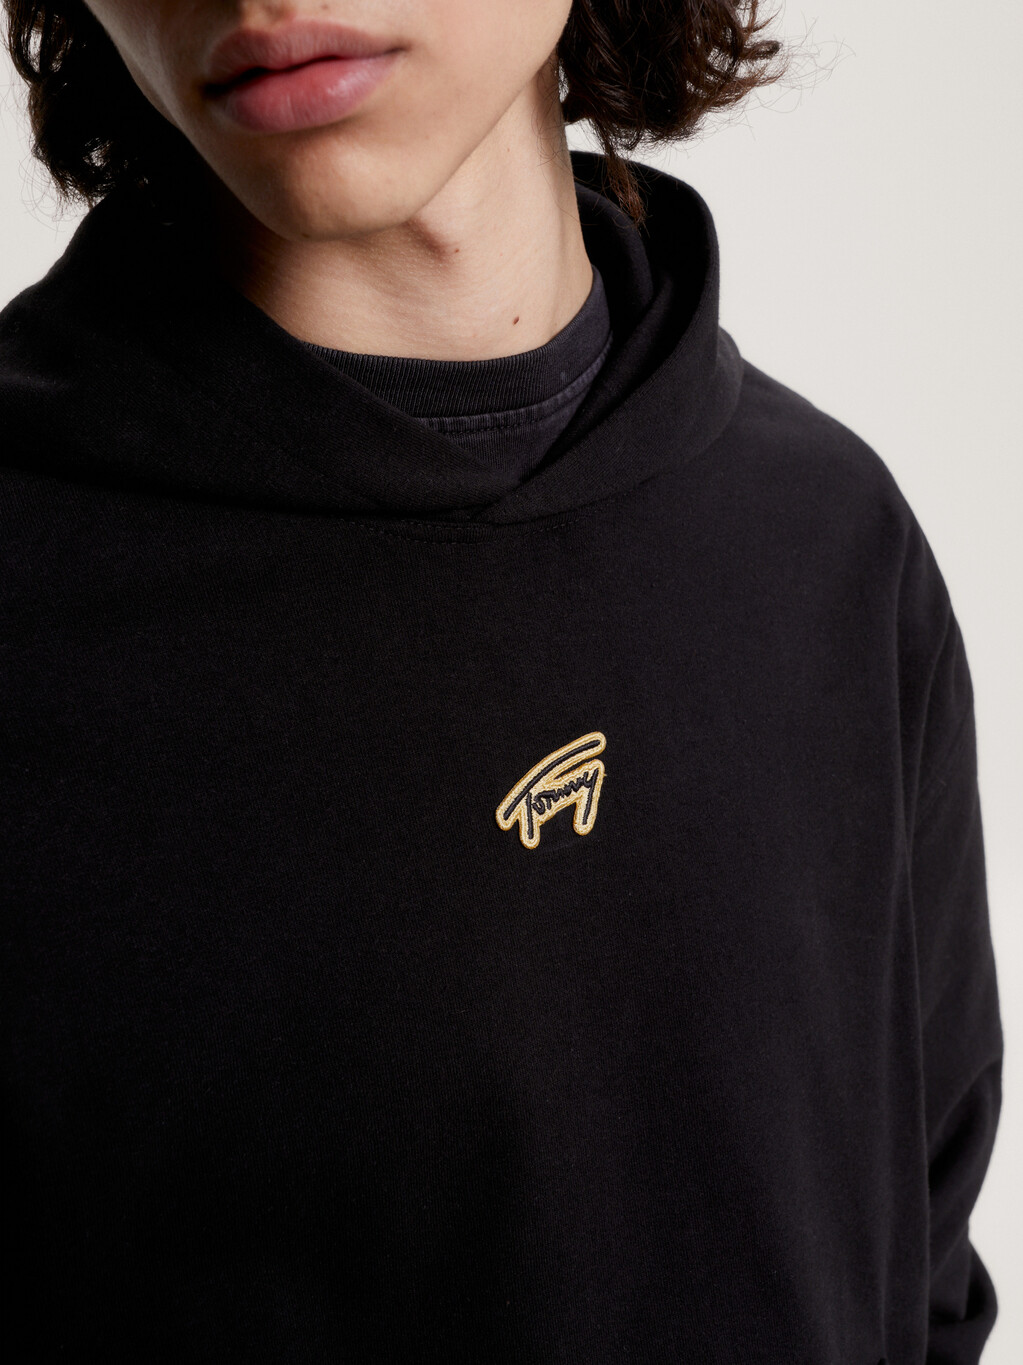 Signature Logo Relaxed Fit Hoody, Black, hi-res